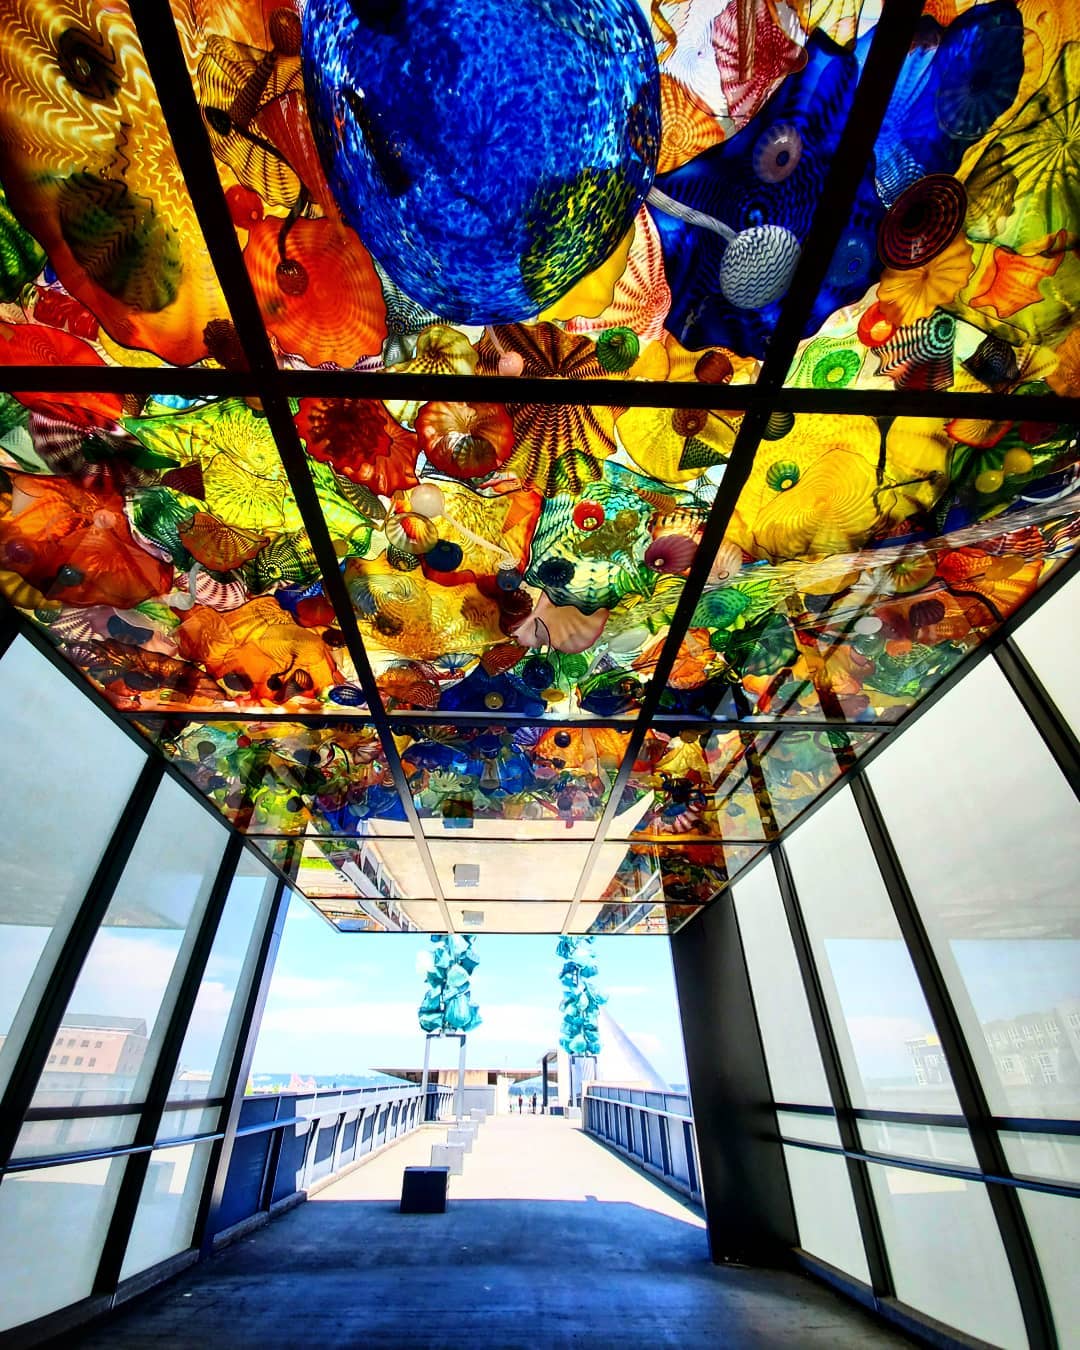 Glass building with colorful glass sculptures on ceiling. Photo by Instagram user @yk5545